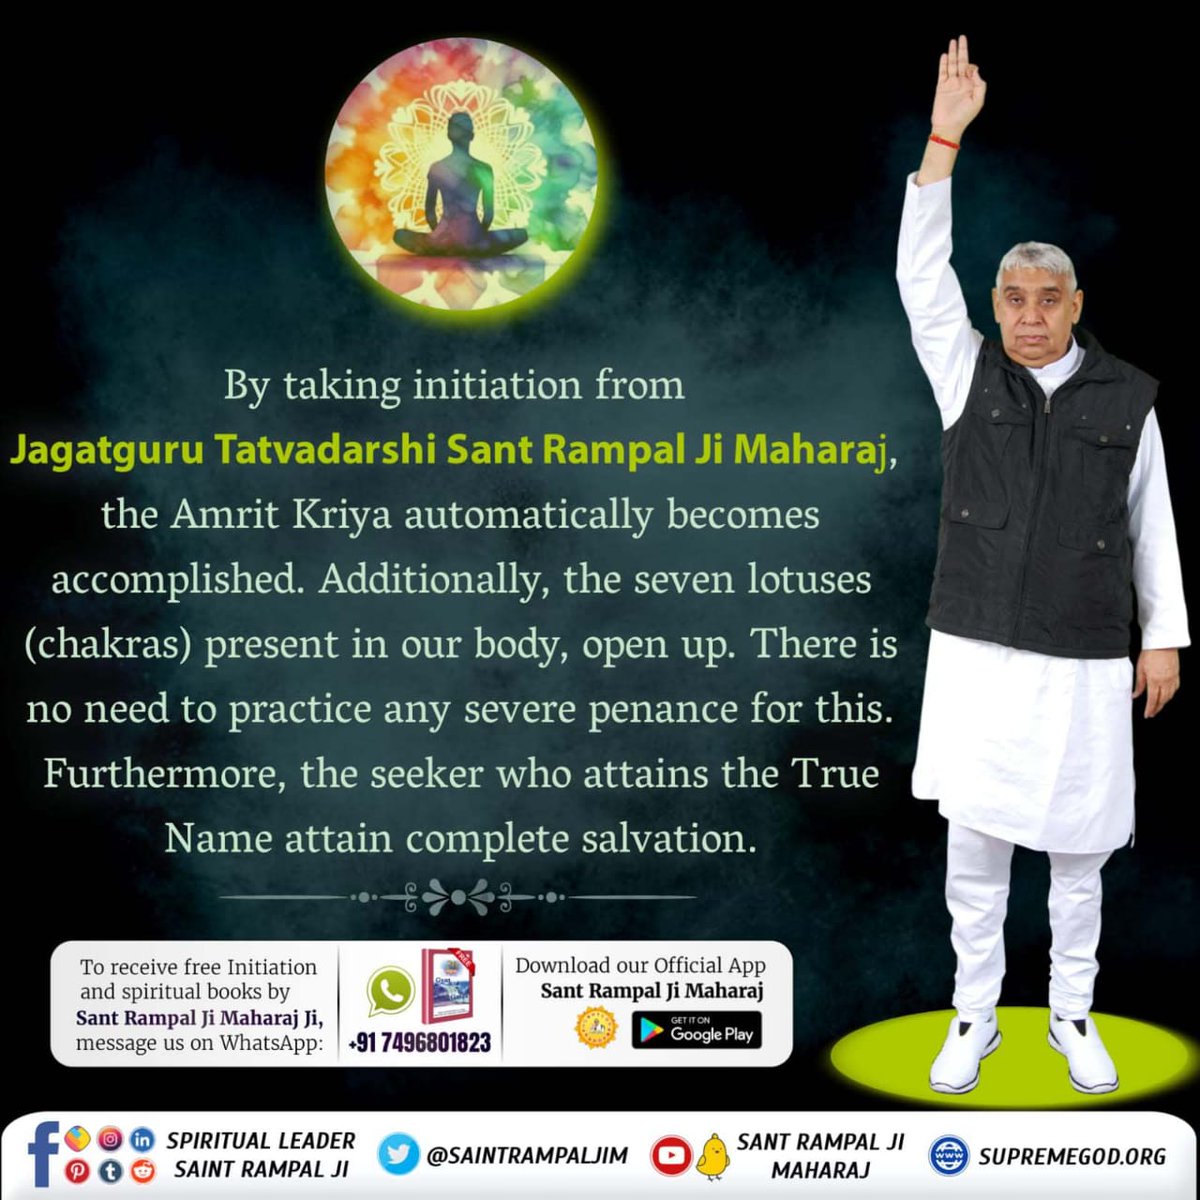 #What_Is_Meditation
By obtaining Satyanaam and Saarnaam from a Tatvdarshi Saint, which point towards the true name mantra, and by doing true devotion while staying within the limits, one will attain complete salvation.
~ Sant Rampal Ji Maharaj